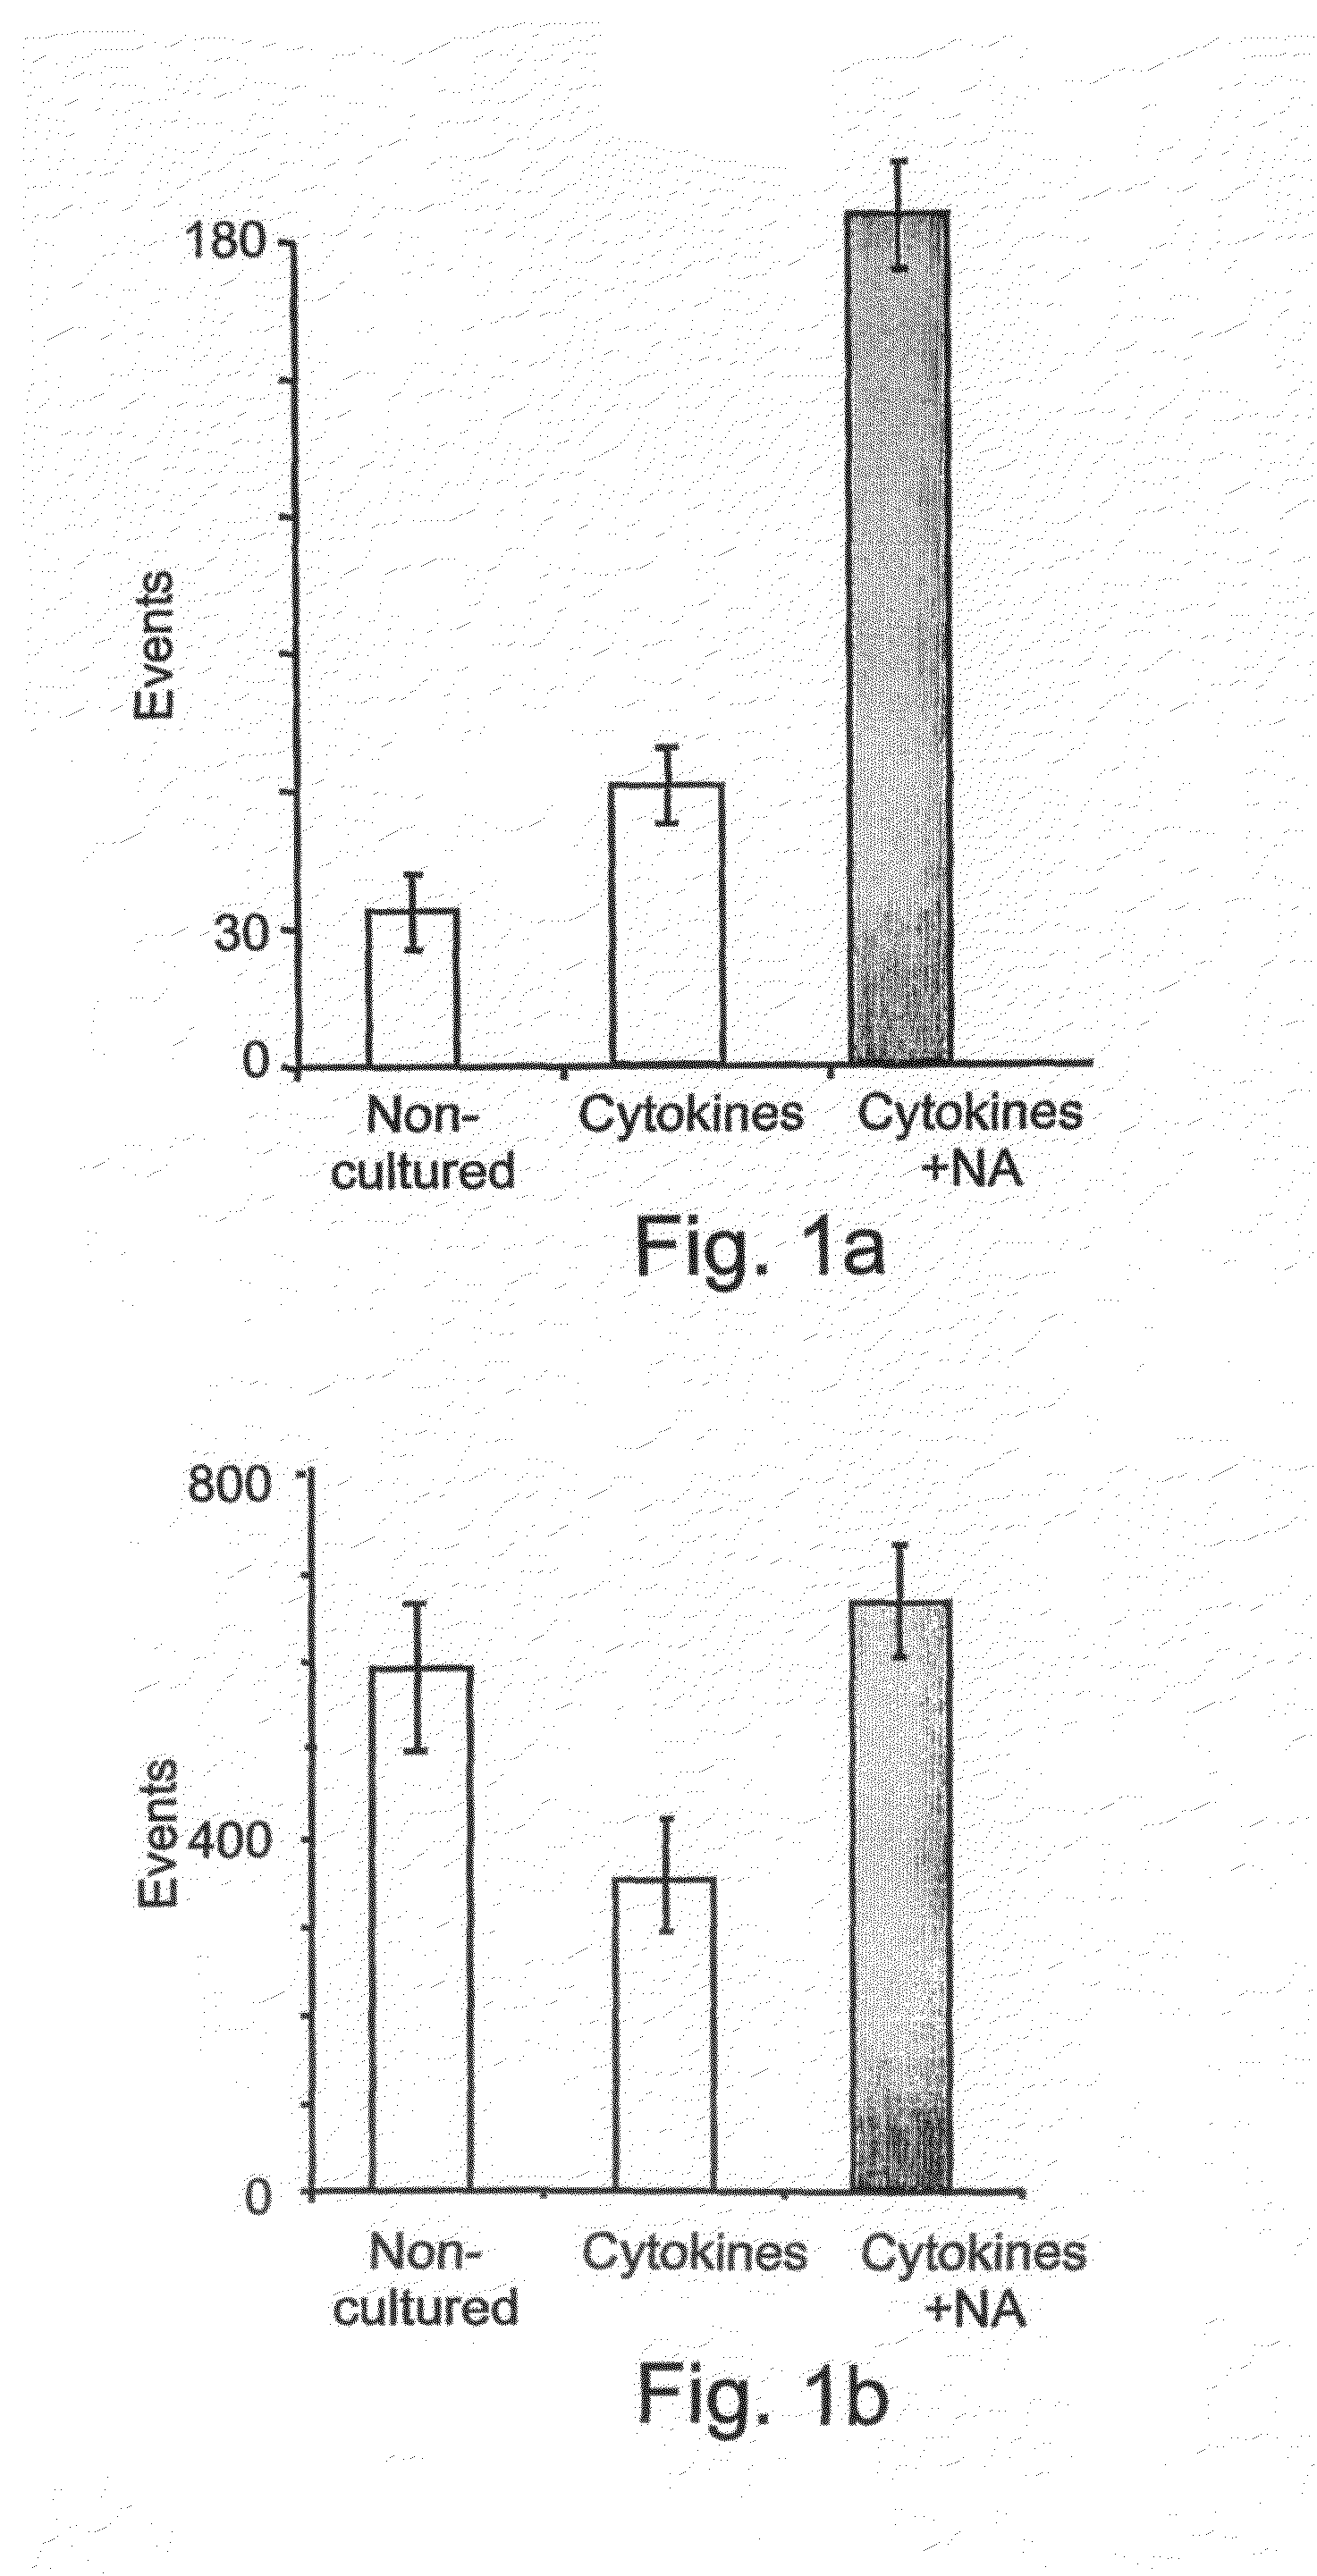 Methods of improving stem cell homing and engraftment